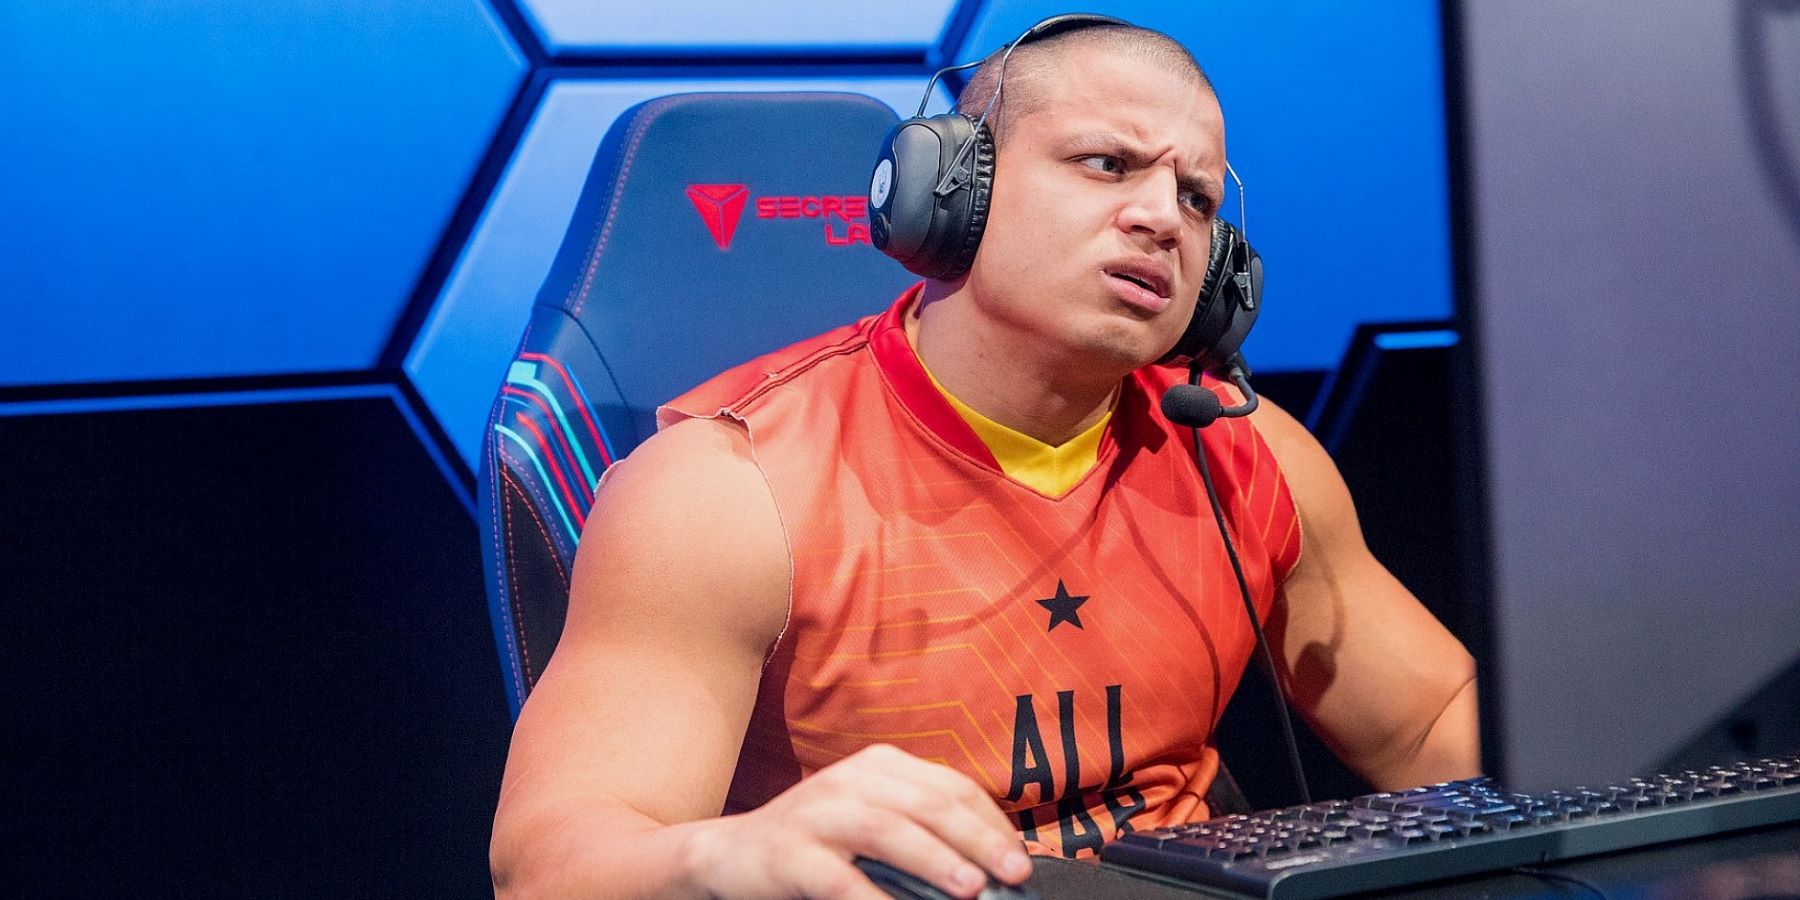 Tyler1 wearing a headset and squinting at a computer screen